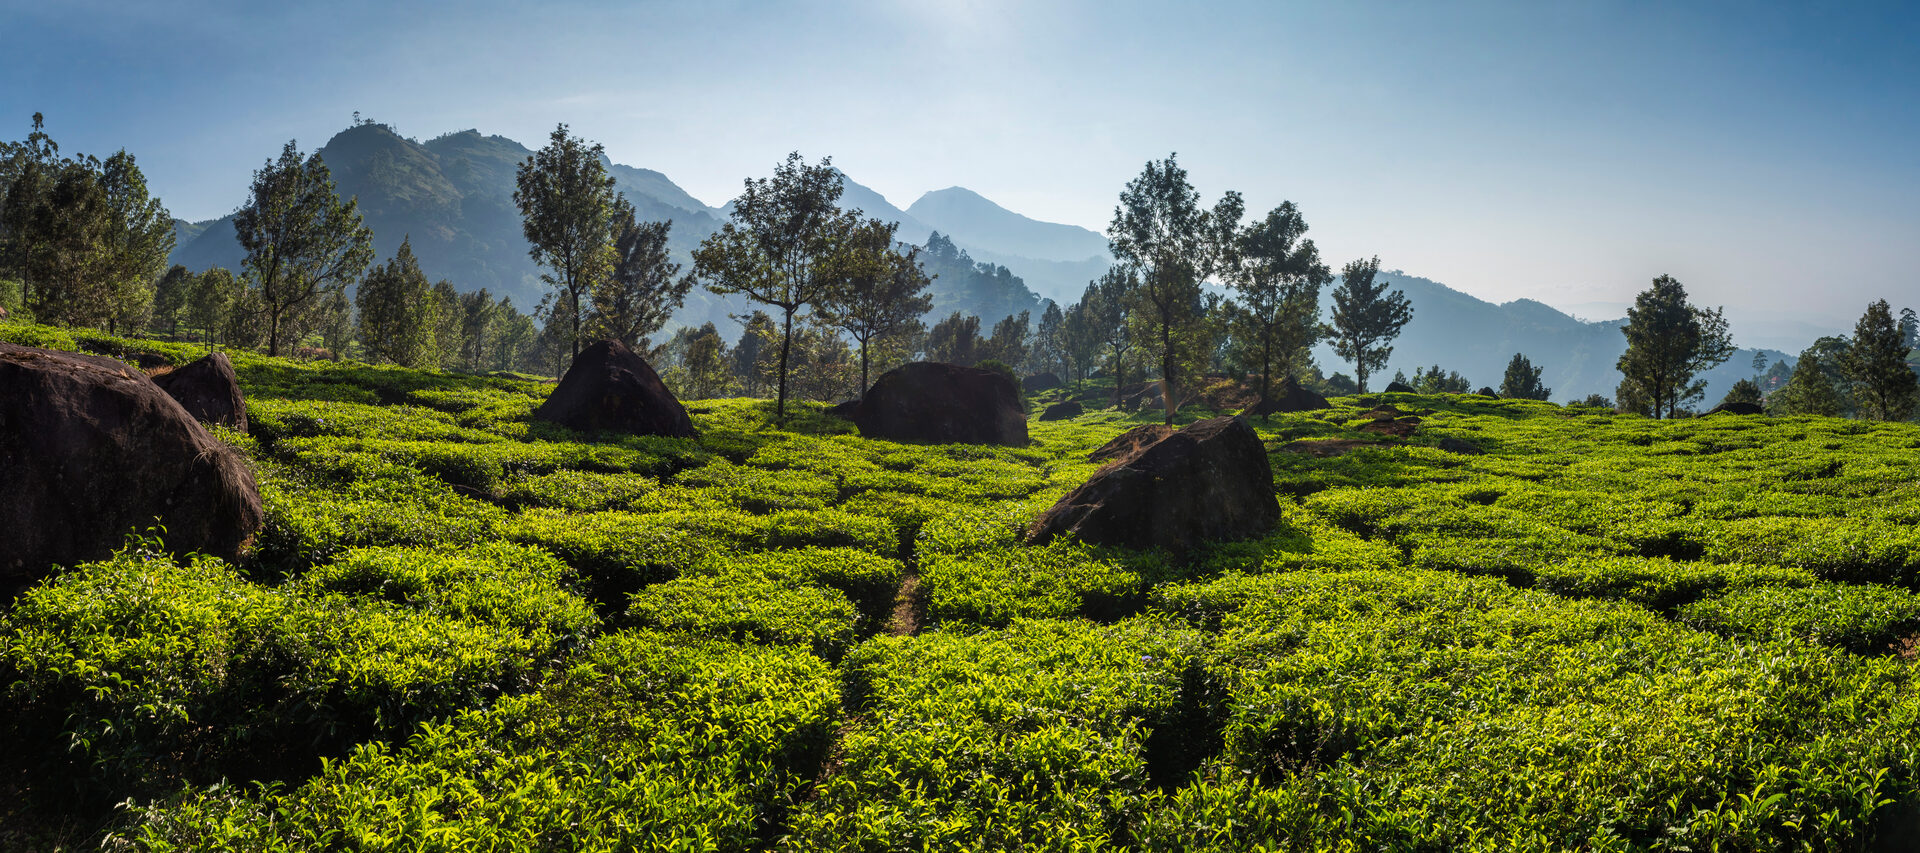 India Landscape Photography Munnar Western Ghats Mountains Kerala India